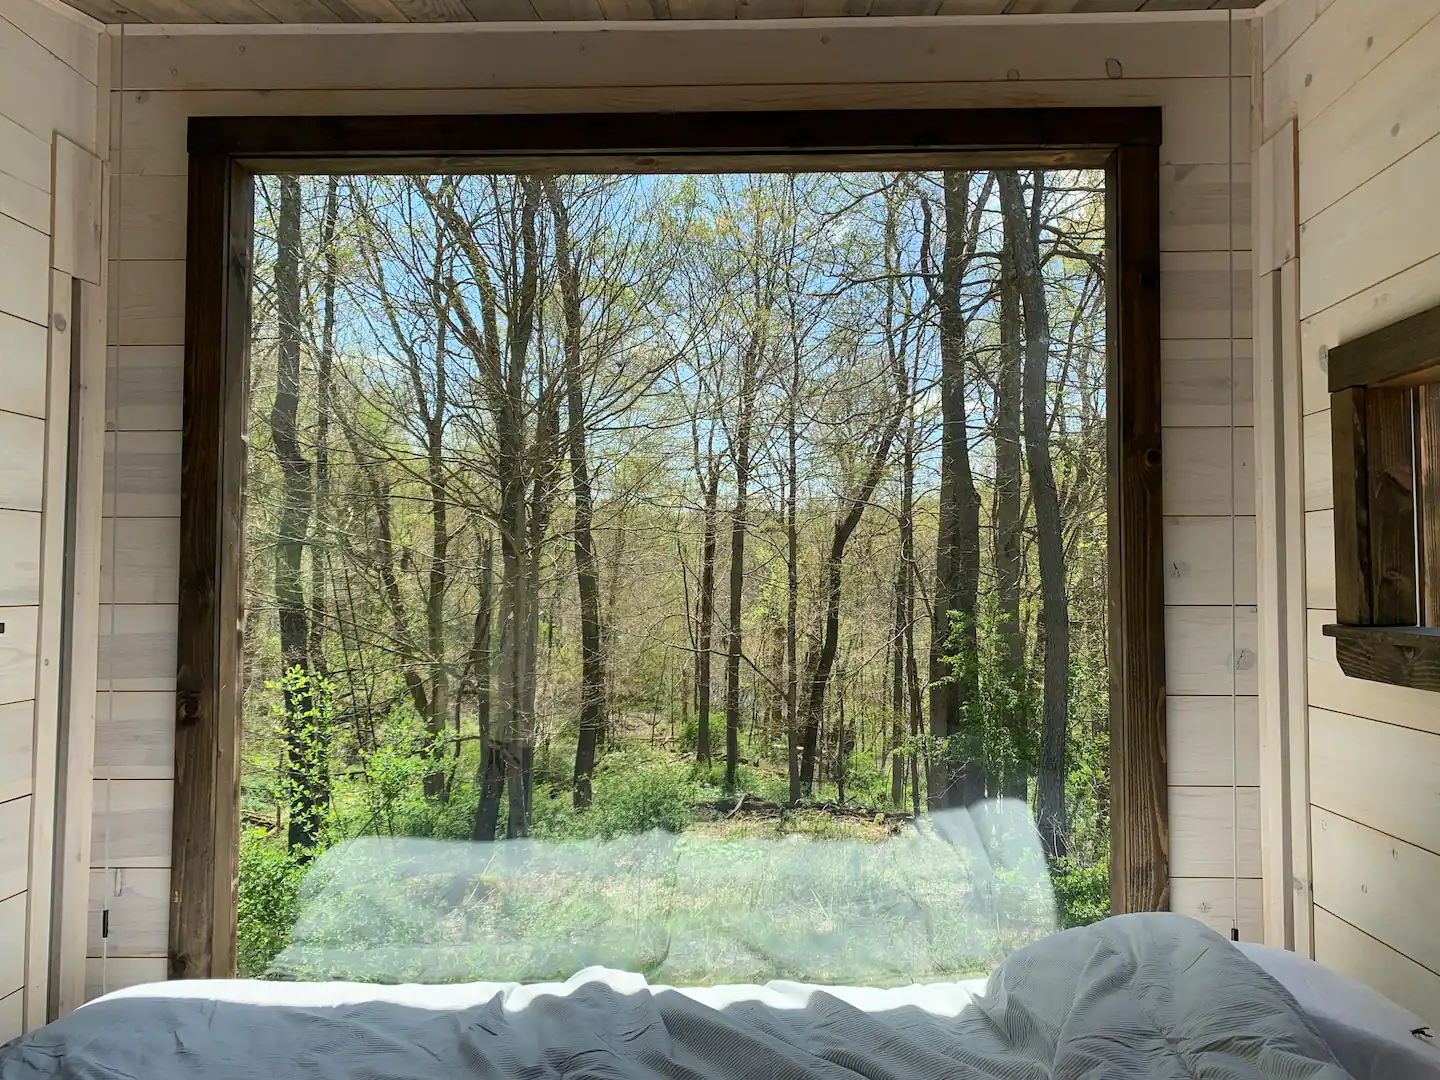 Bed inside a cabin looking out on green scenery